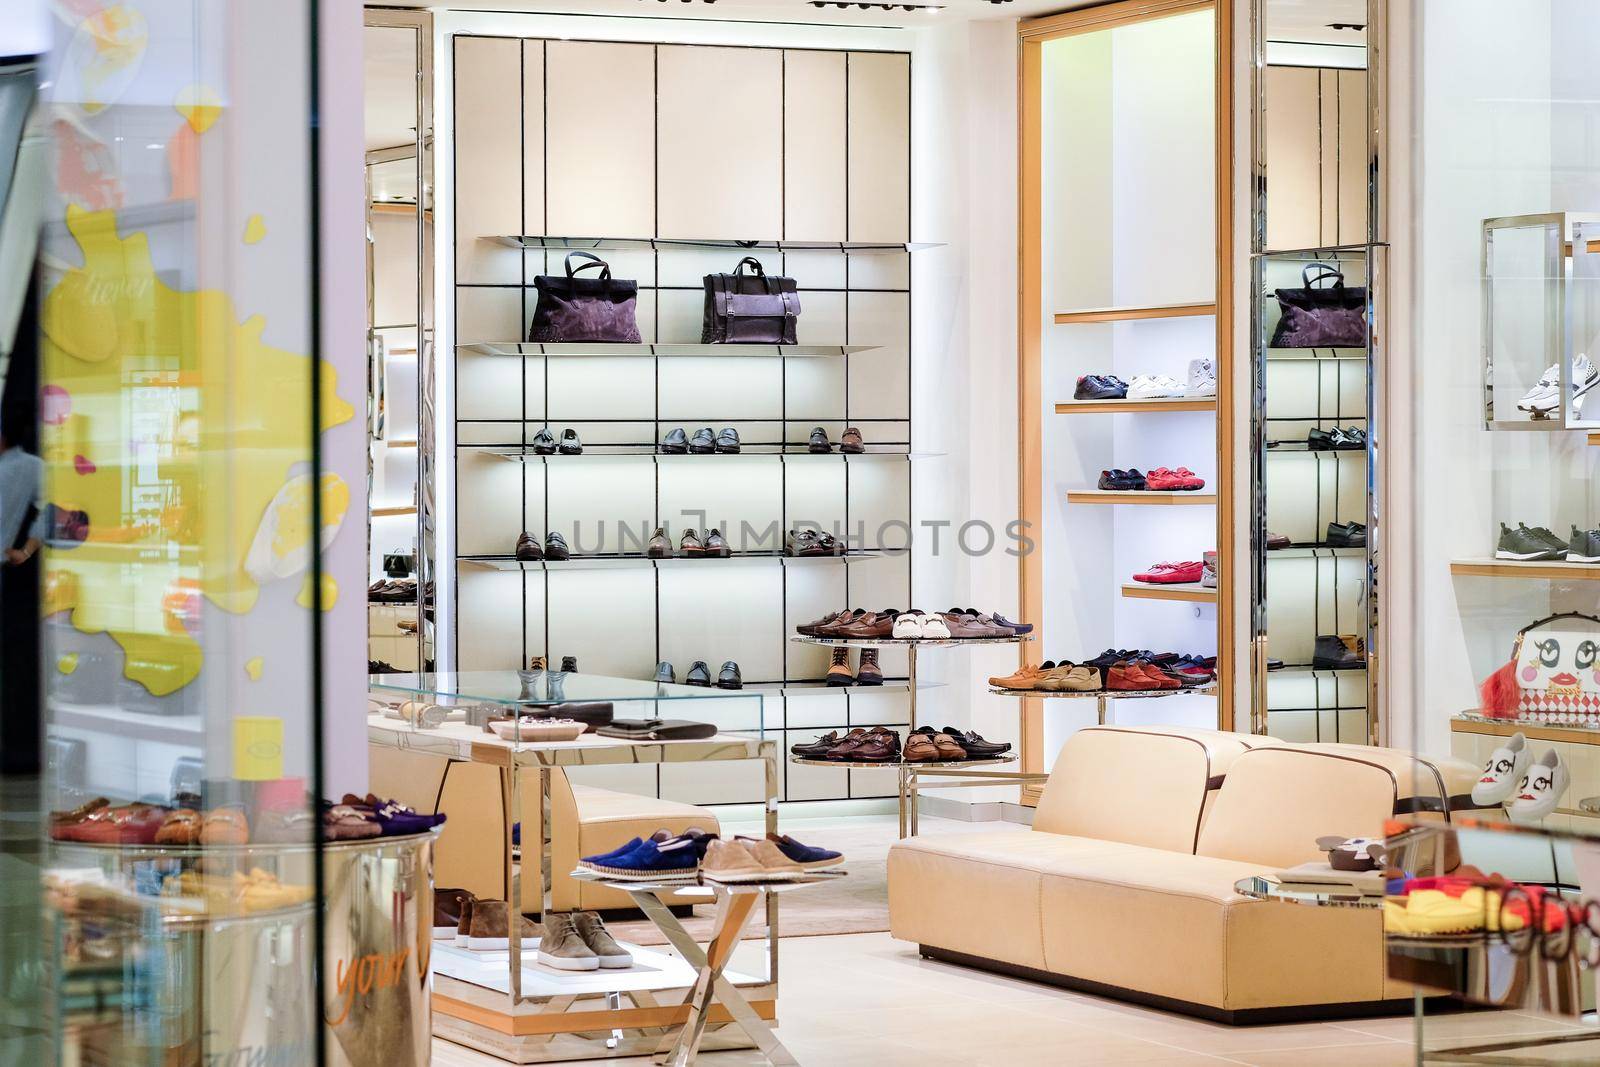 Interior of TODS Shop from outside view by Chiradech